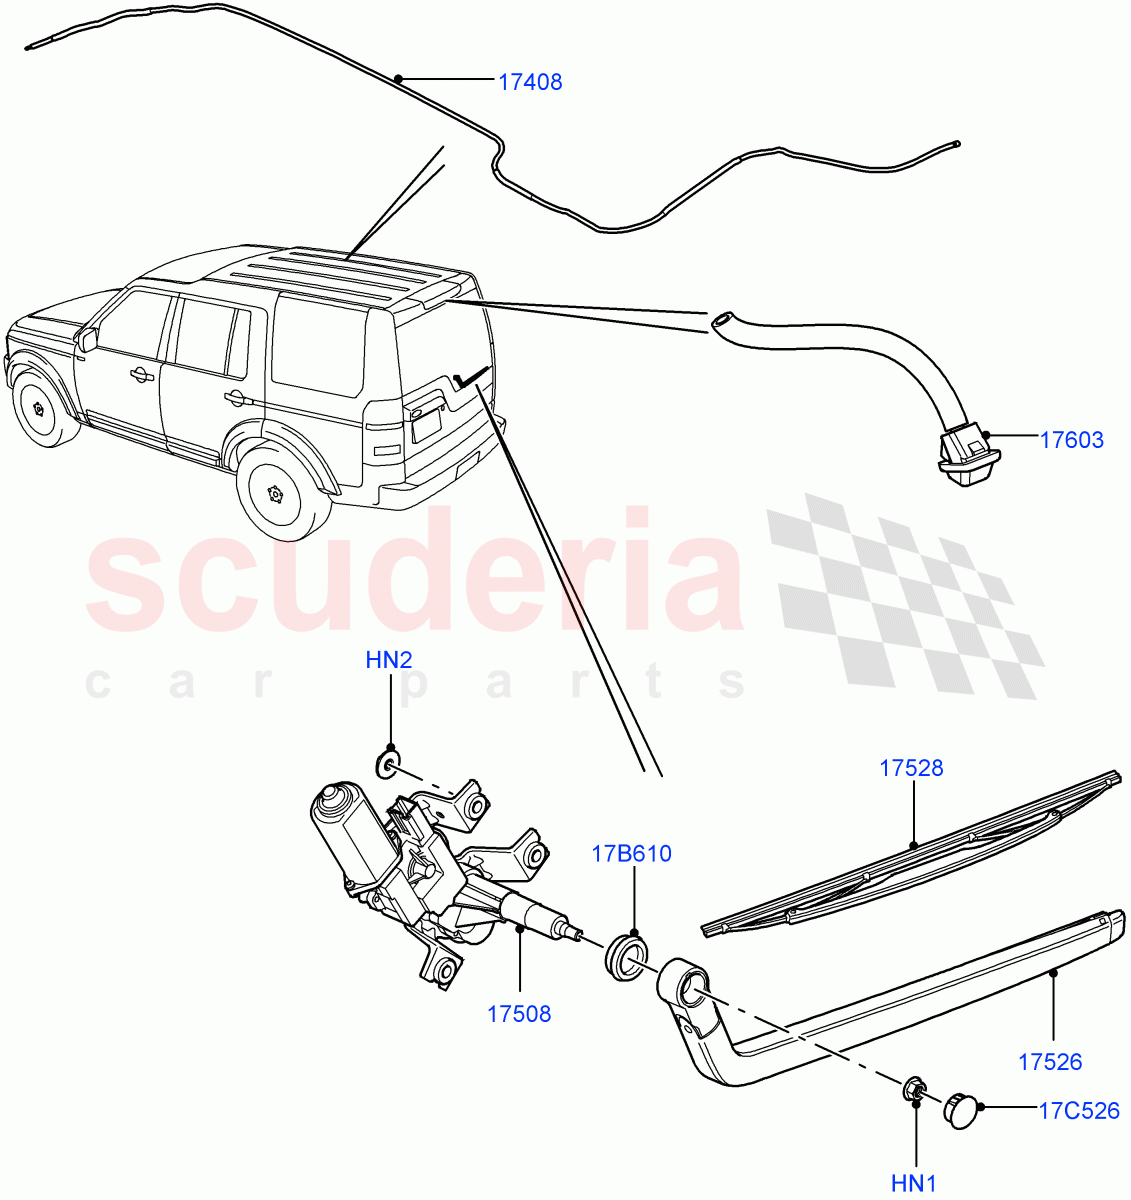 Rear Window Wiper And Washer((V)FROMAA000001) of Land Rover Land Rover Discovery 4 (2010-2016) [2.7 Diesel V6]